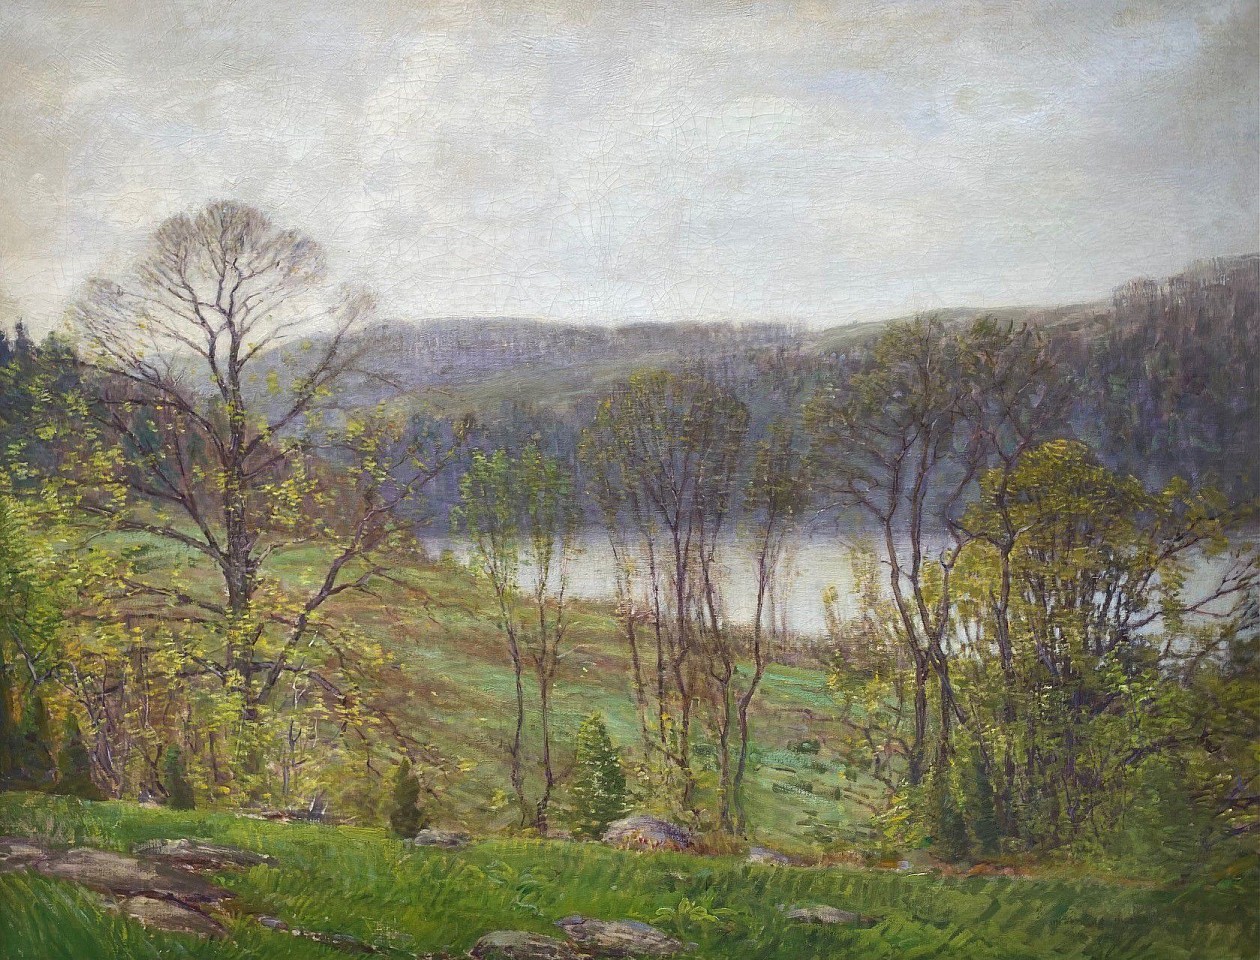 Robert Hogg Nisbet, May Morning
oil on canvas, 42"" x 52""
PS 0121
$15,000